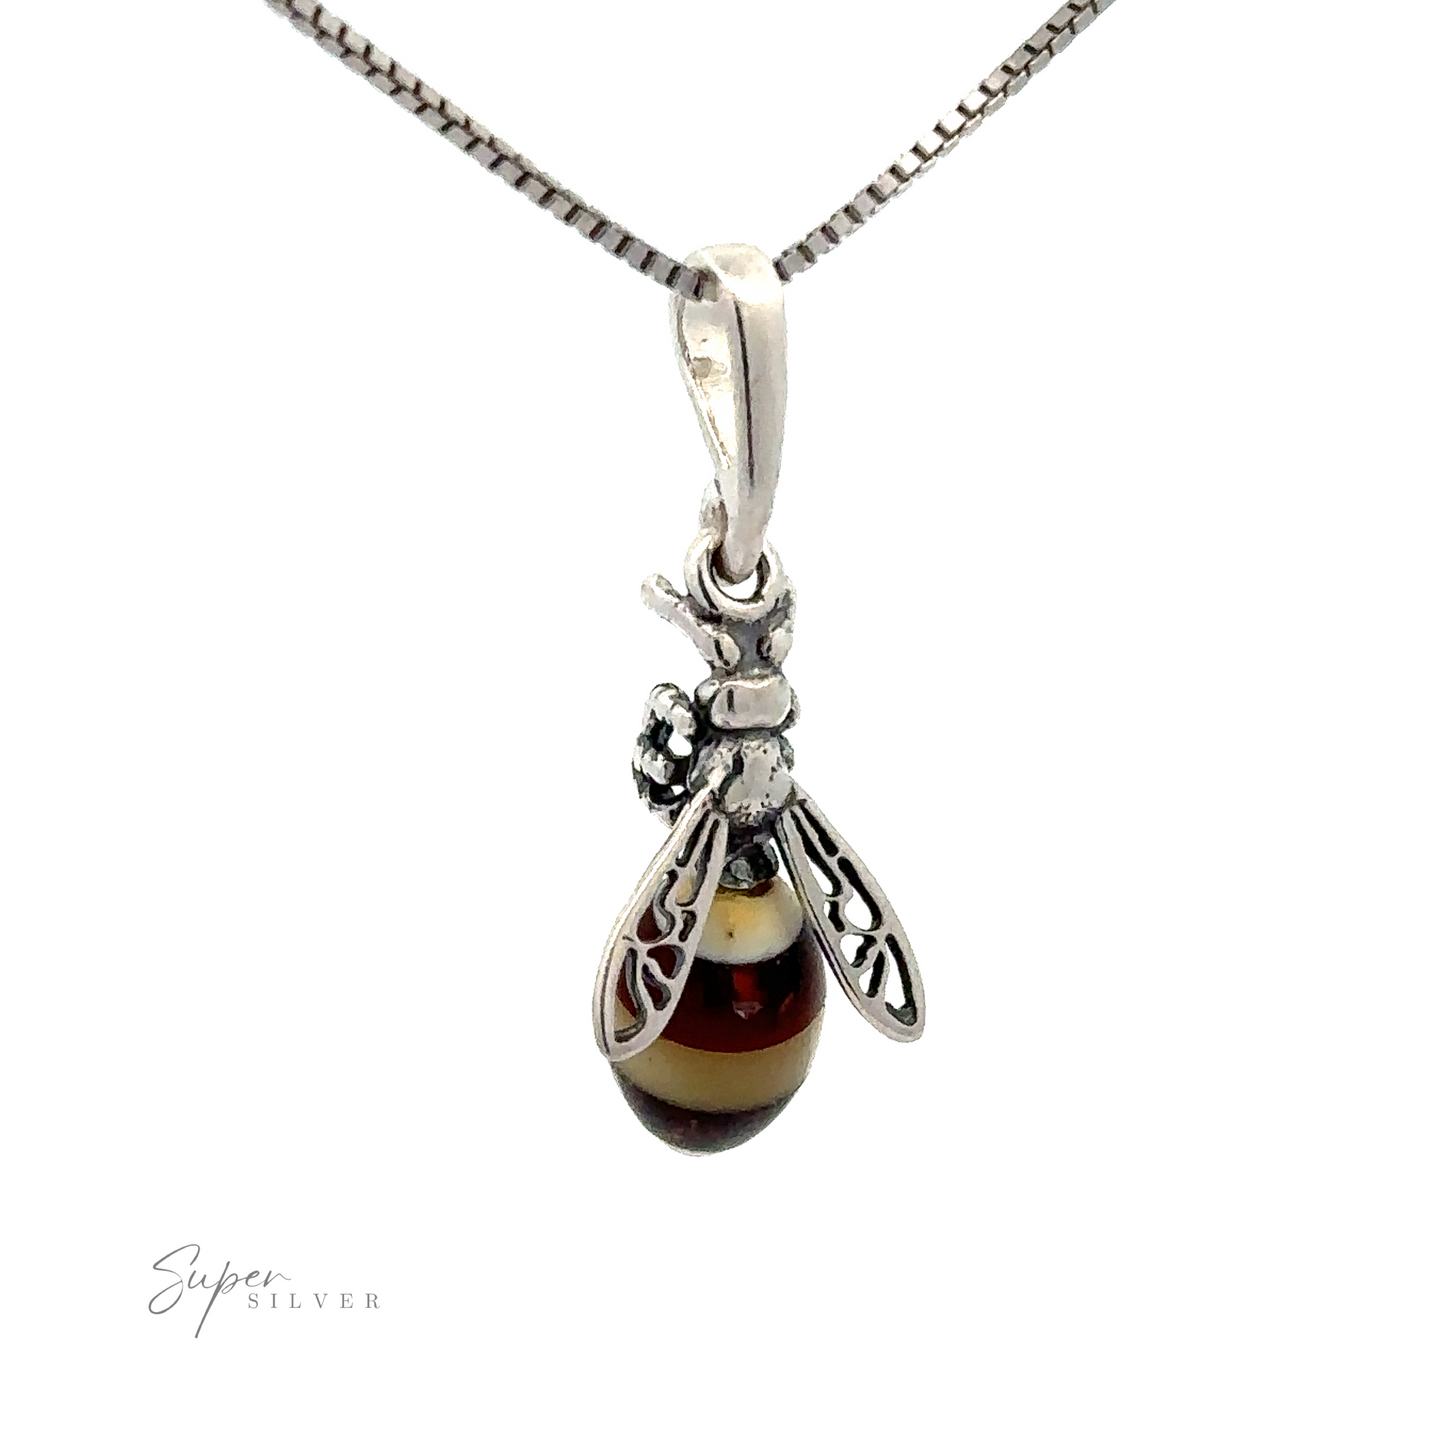 
                  
                    A sterling silver jewelry piece, this Beautiful Amber Yellow Jacket Pendant in the shape of a bee with a striped body hangs from a chain, displayed against a white background. The amber pendant features intricate detailing on the wings and body, adding elegance to its design.

                  
                